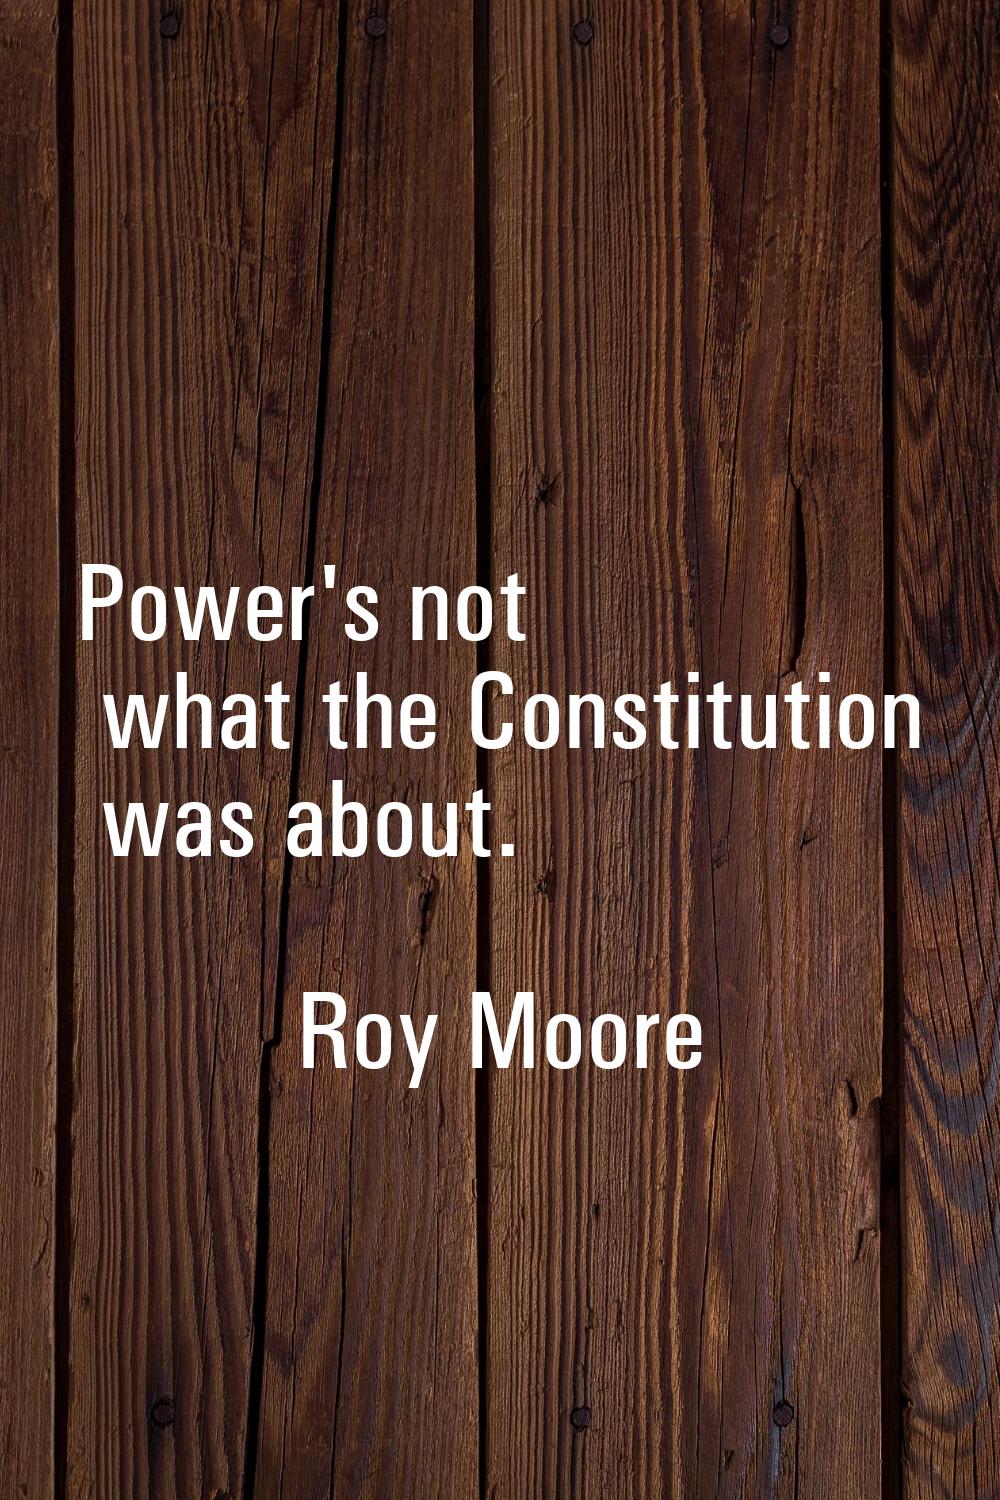 Power's not what the Constitution was about.